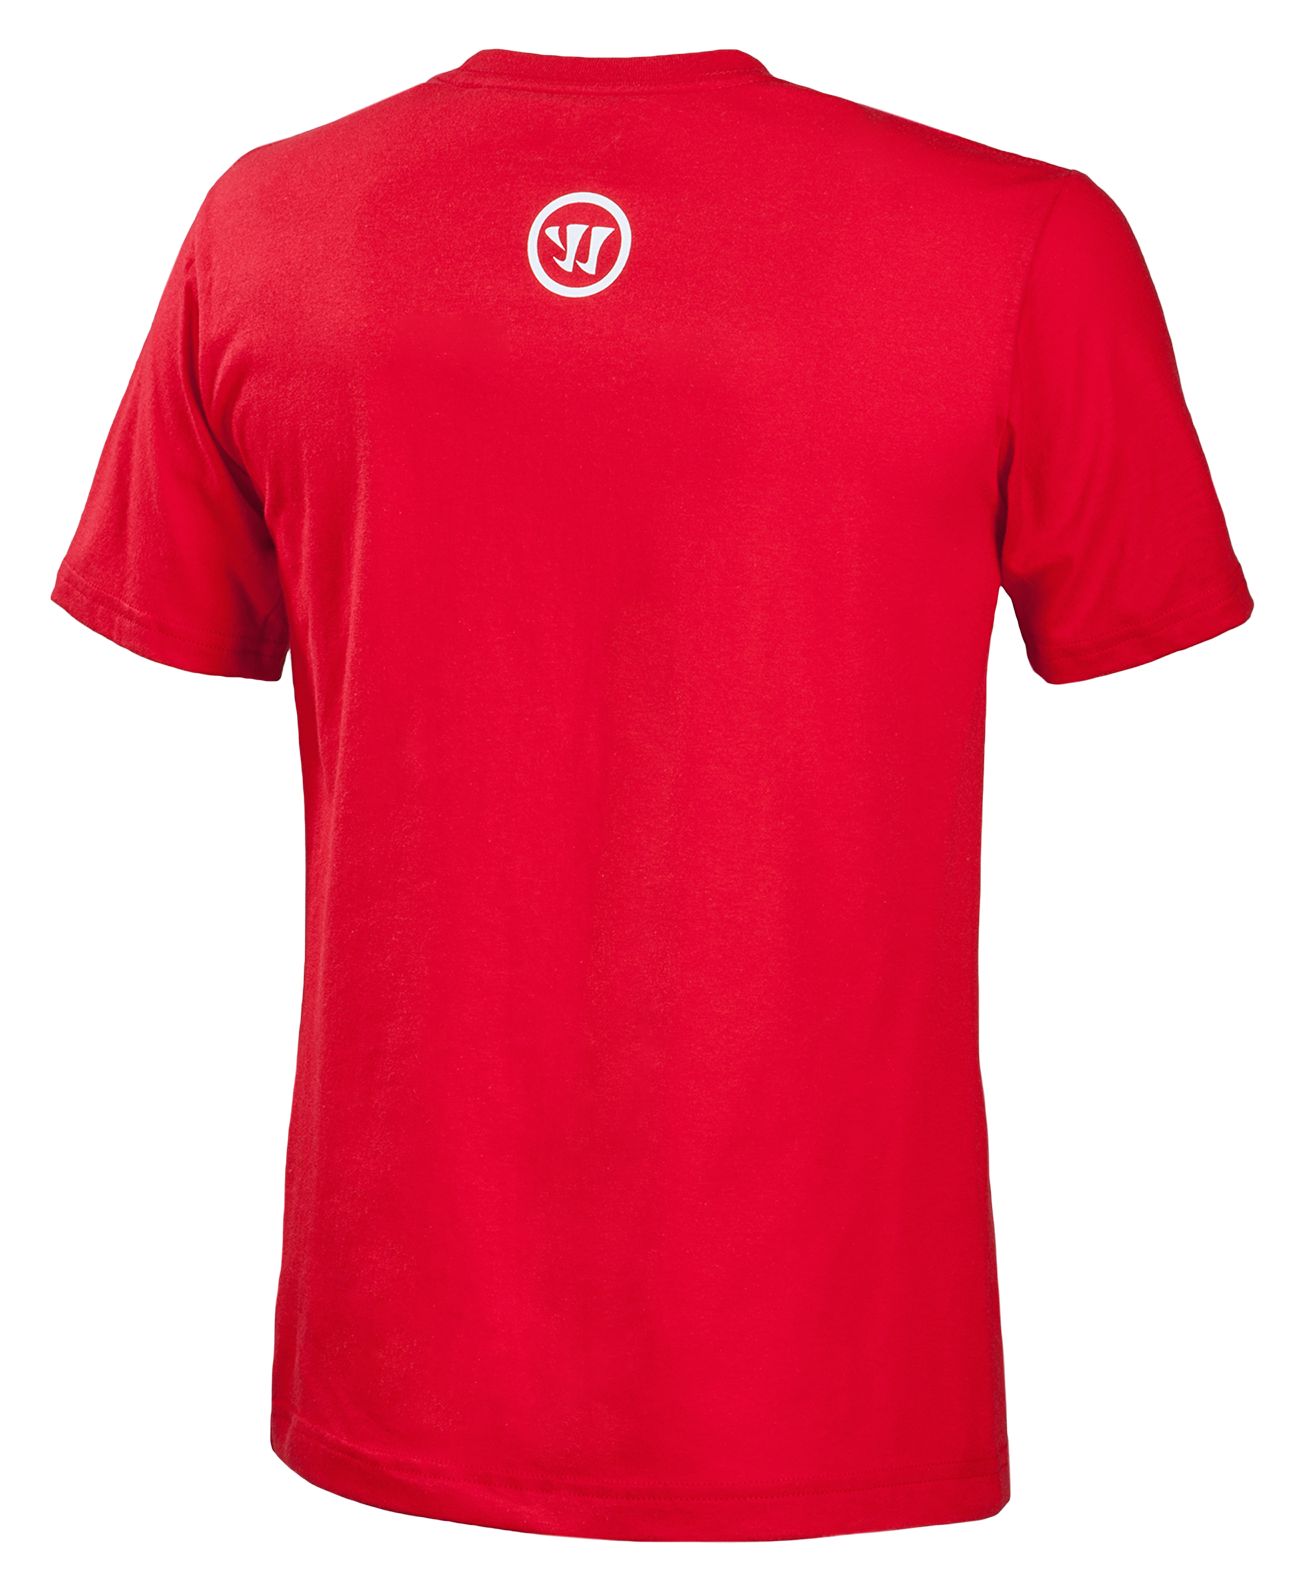 Youth Warrior Logo Tee, Red image number 0